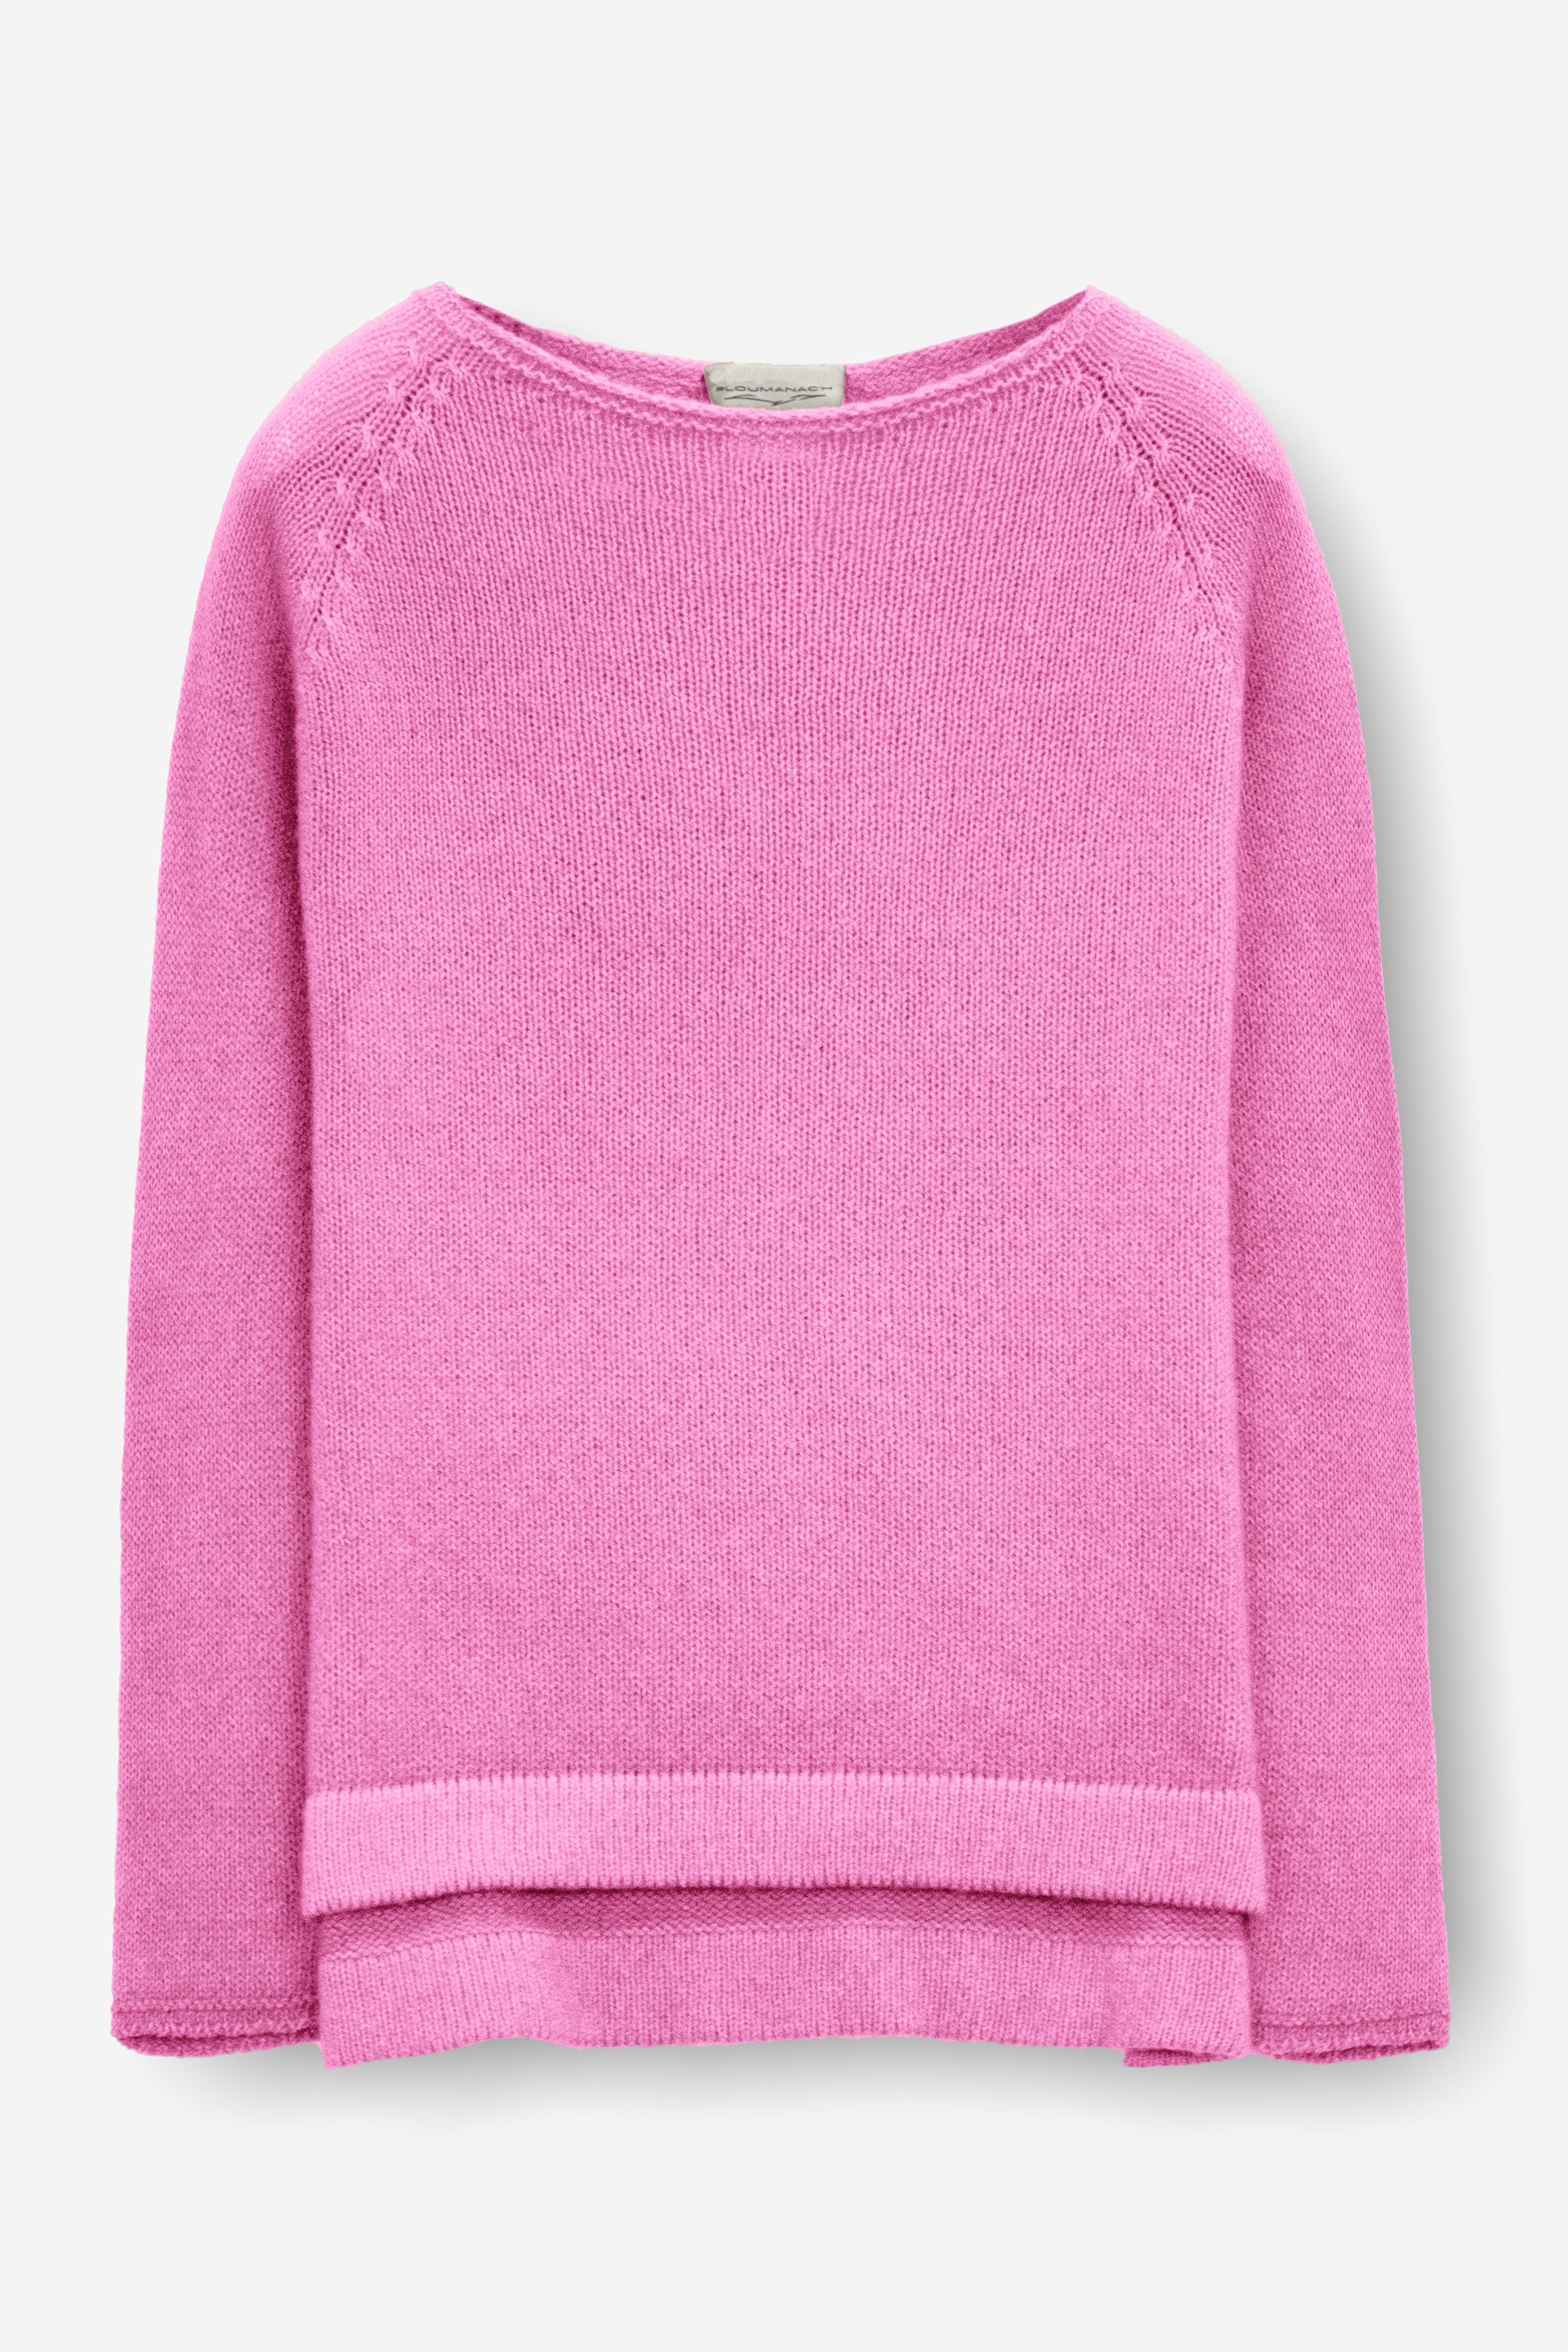 Appin Sweater - Candy